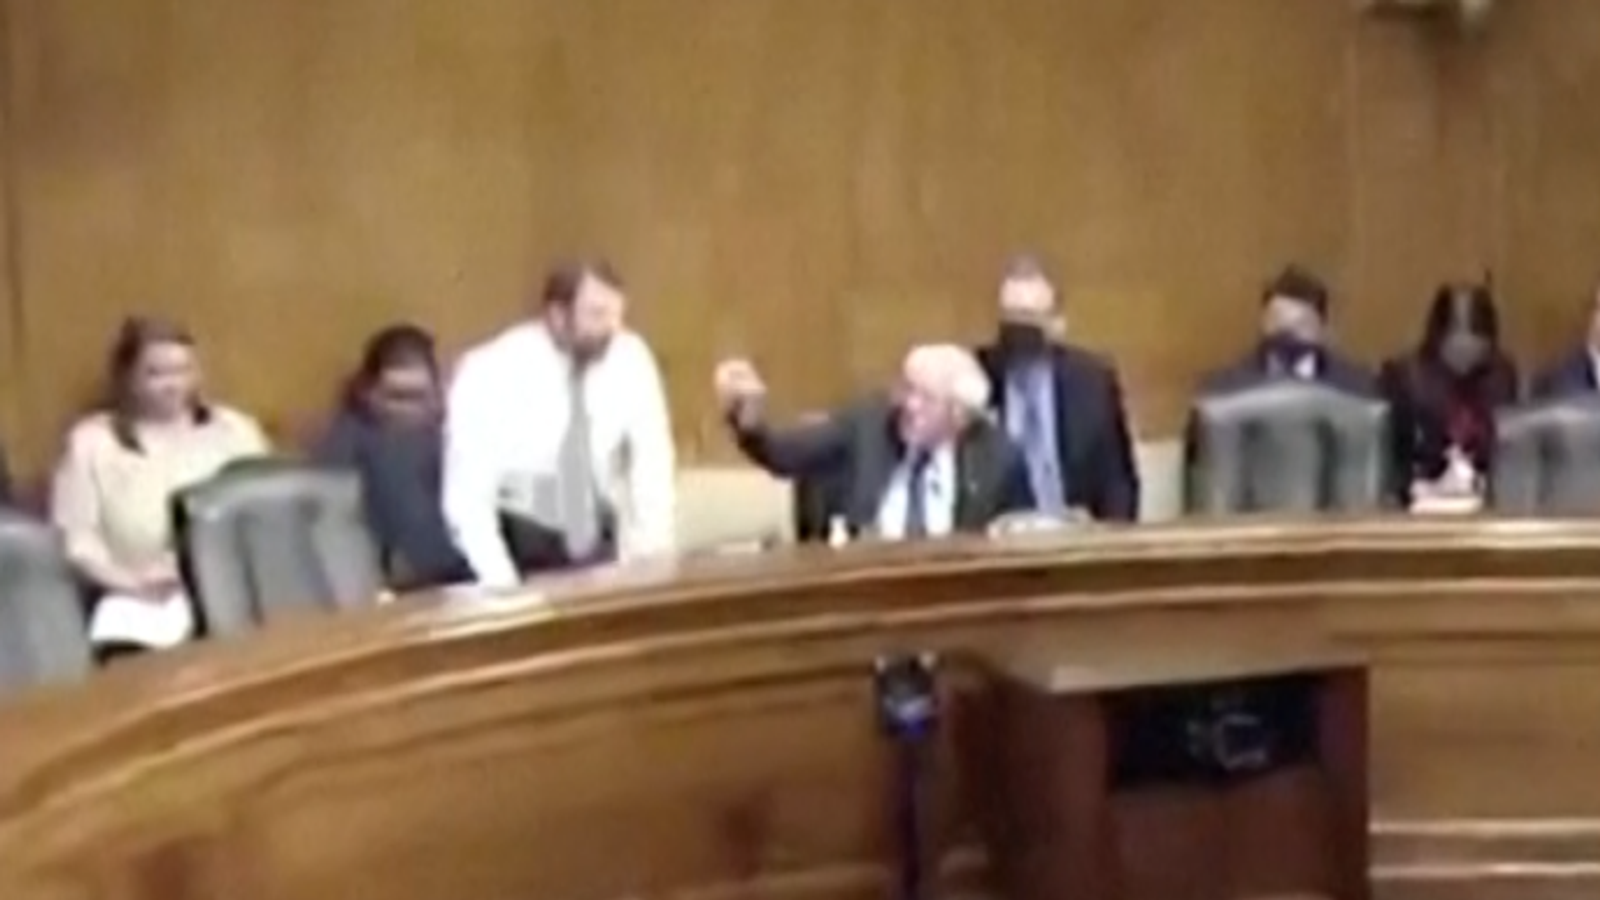 Bernie Sanders steps in to prevent fist fight during heated war of words at US Senate hearing